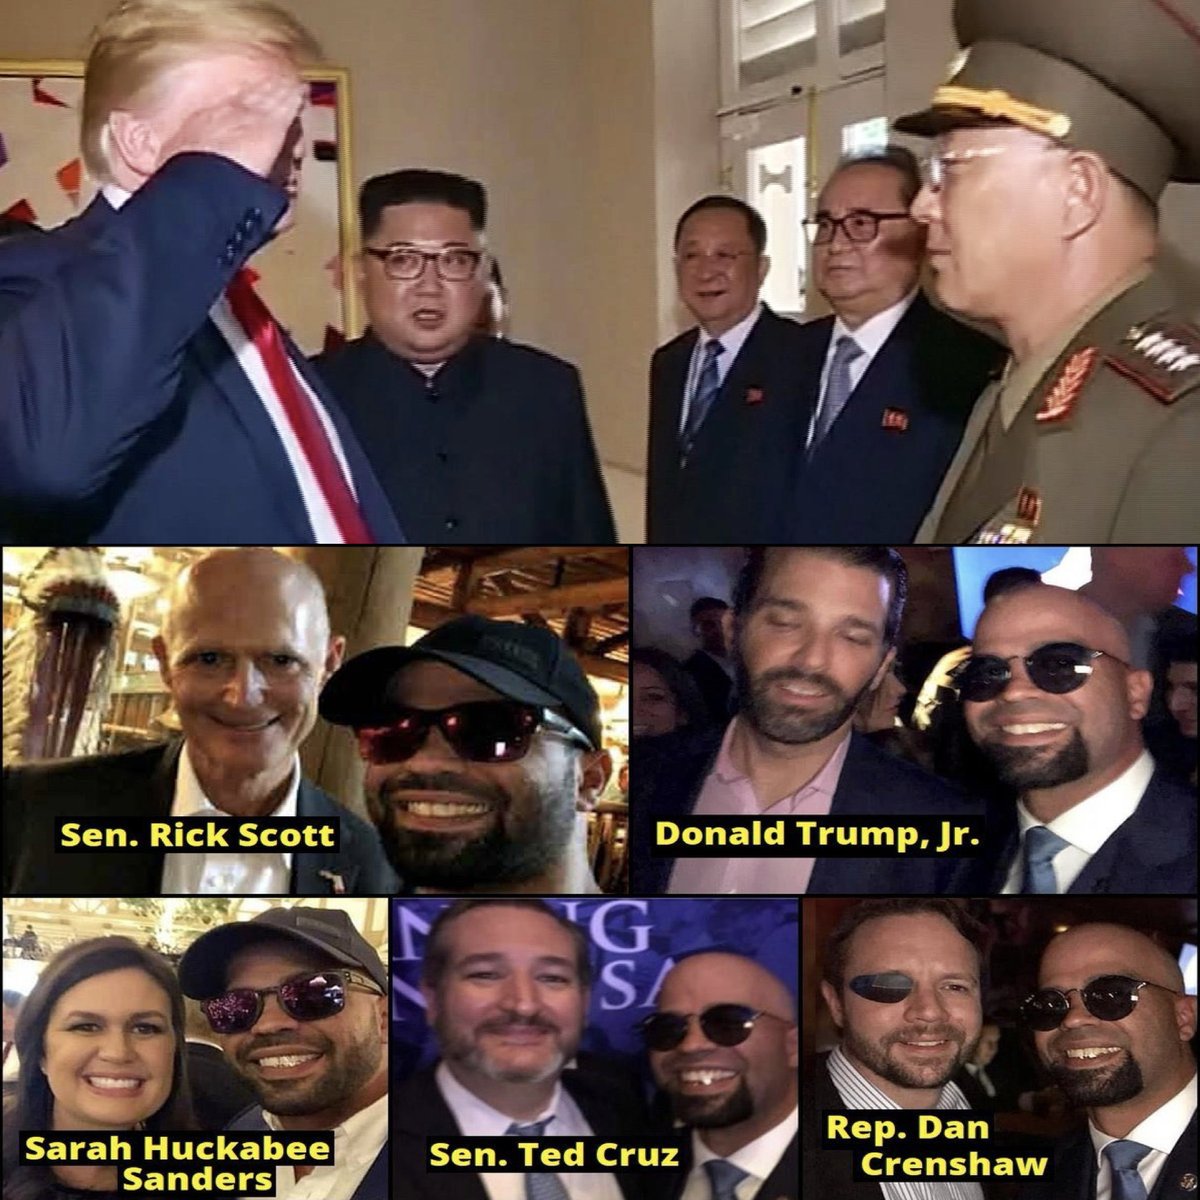 Republicans showed America's military and veterans EXACTLY who they were by not blinking when their standard-bearer saluted a dictator's top general. And when Trump's GOP 'lieutenants' fawned over convicted seditionist Enrique Tarrio. #DemVoice1 #ProudBlue #ONEV1